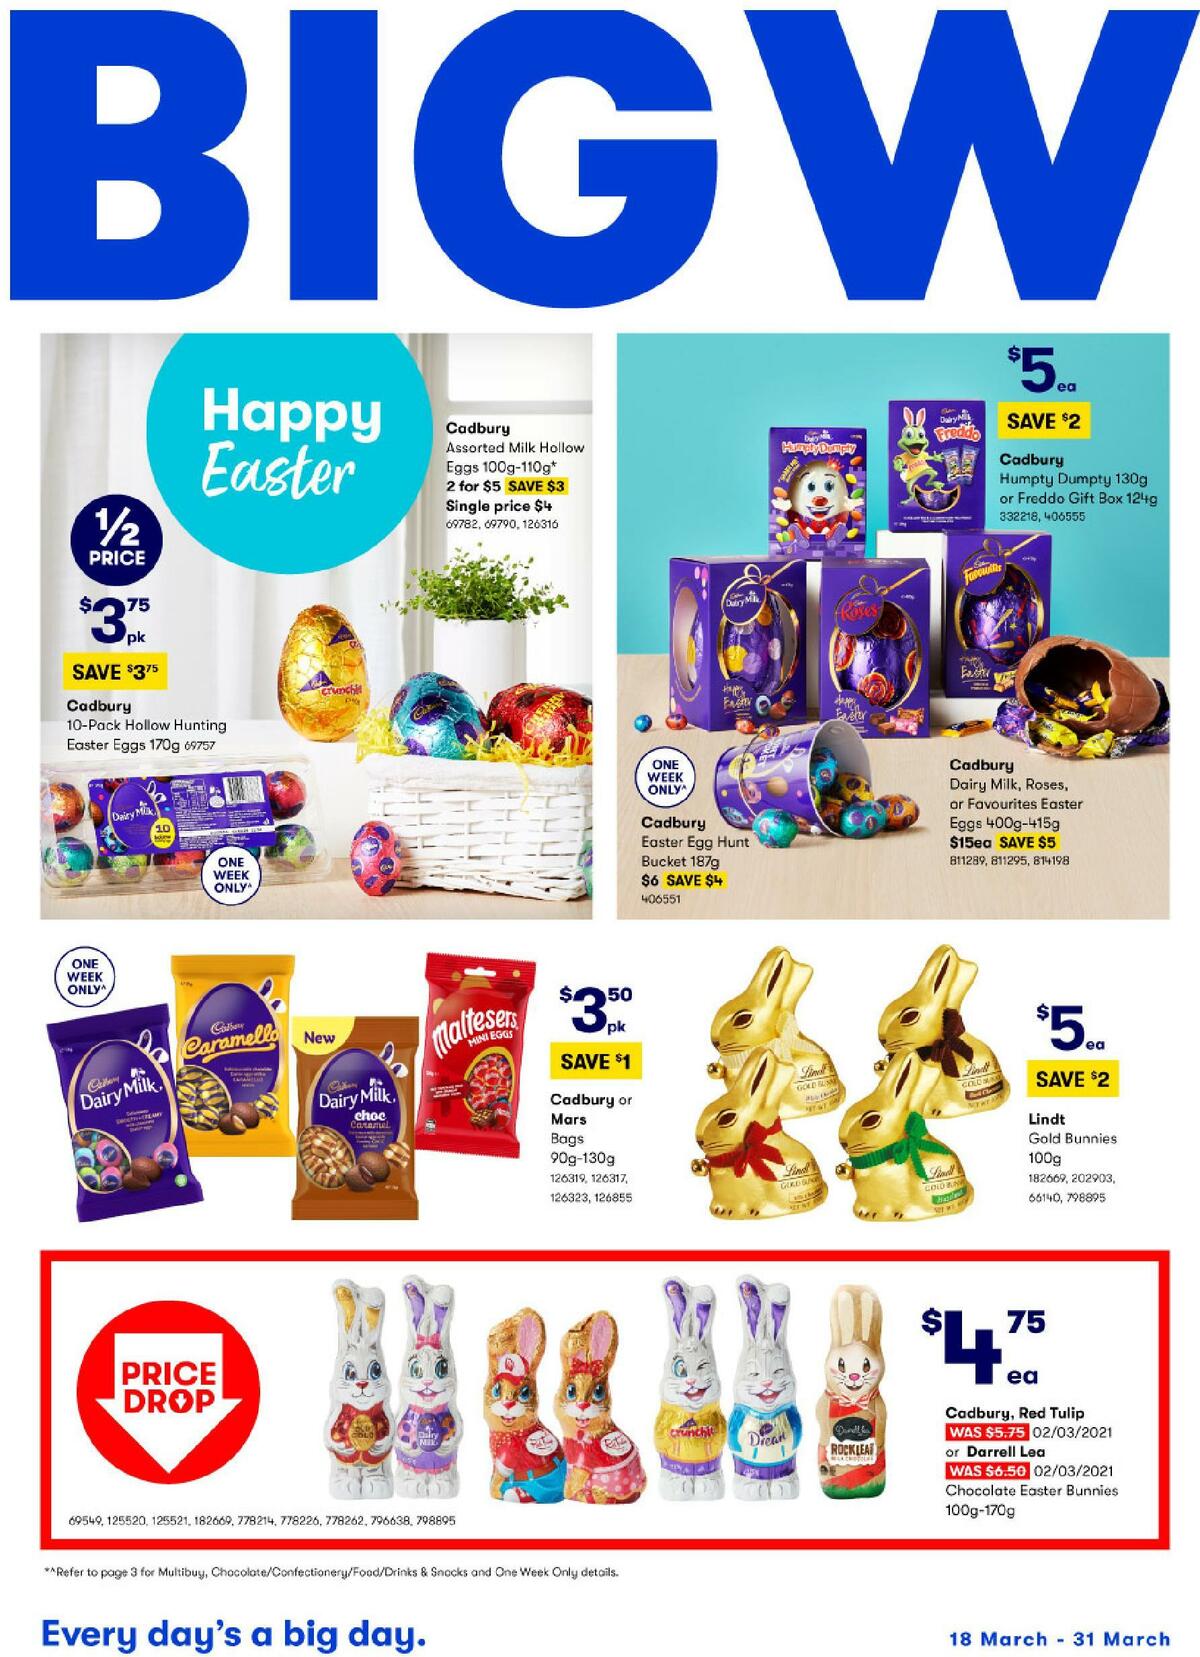 Big W Happy Easter Catalogues from 18 March